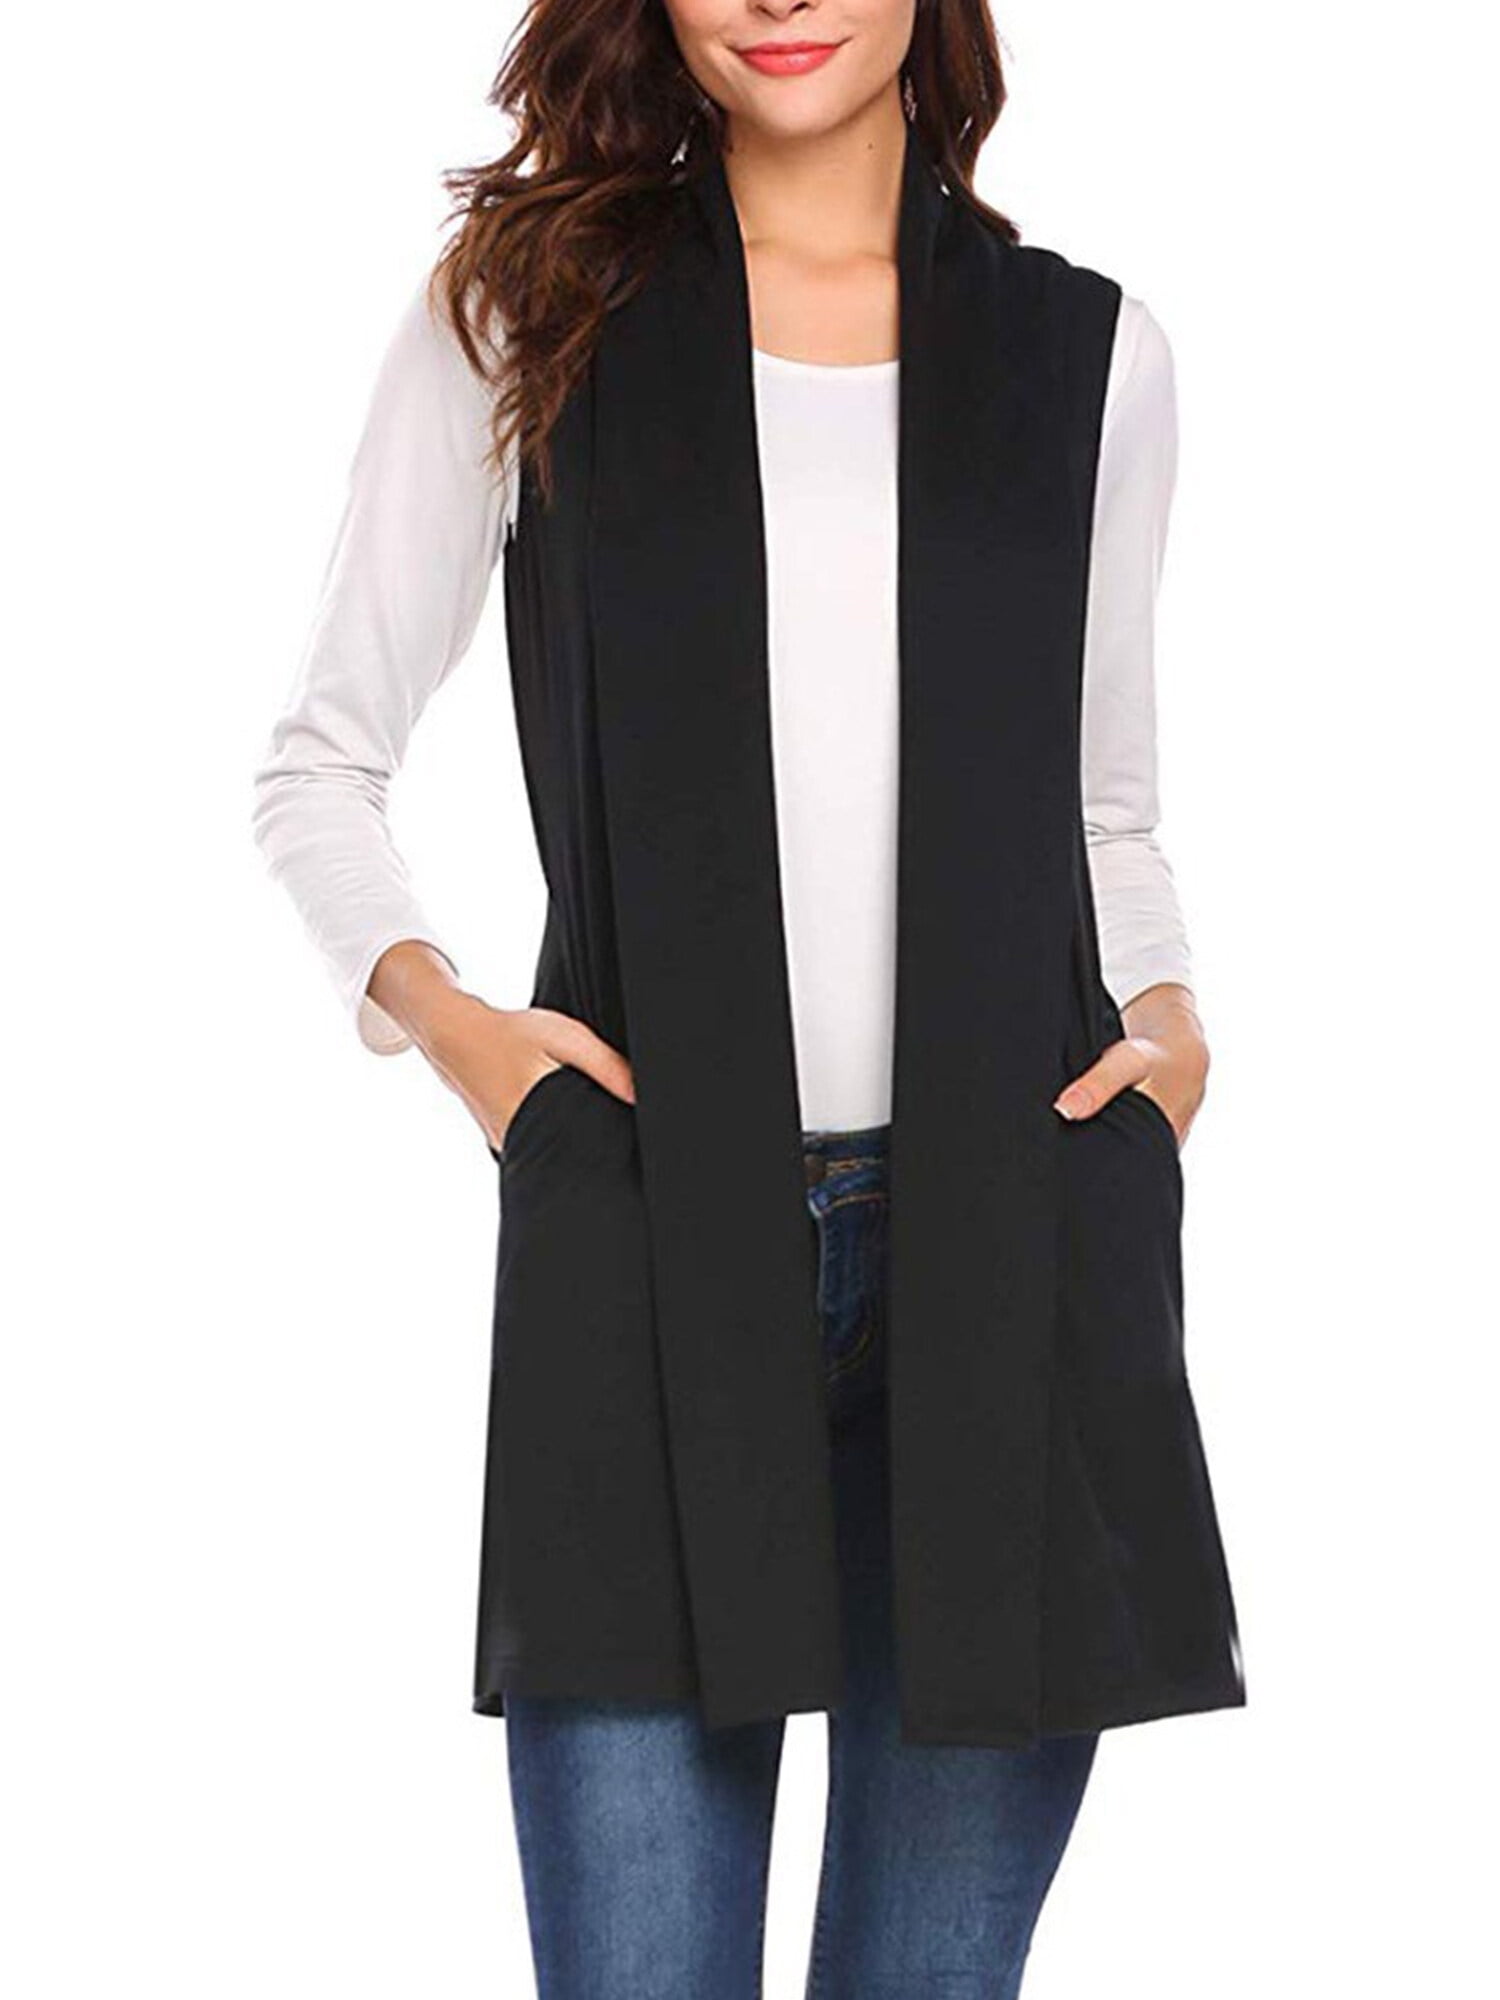 Women Long Vest Front Open Cardigan Sleeveless Waistcoat with Side Pocket  Girl Clothes, Black, L